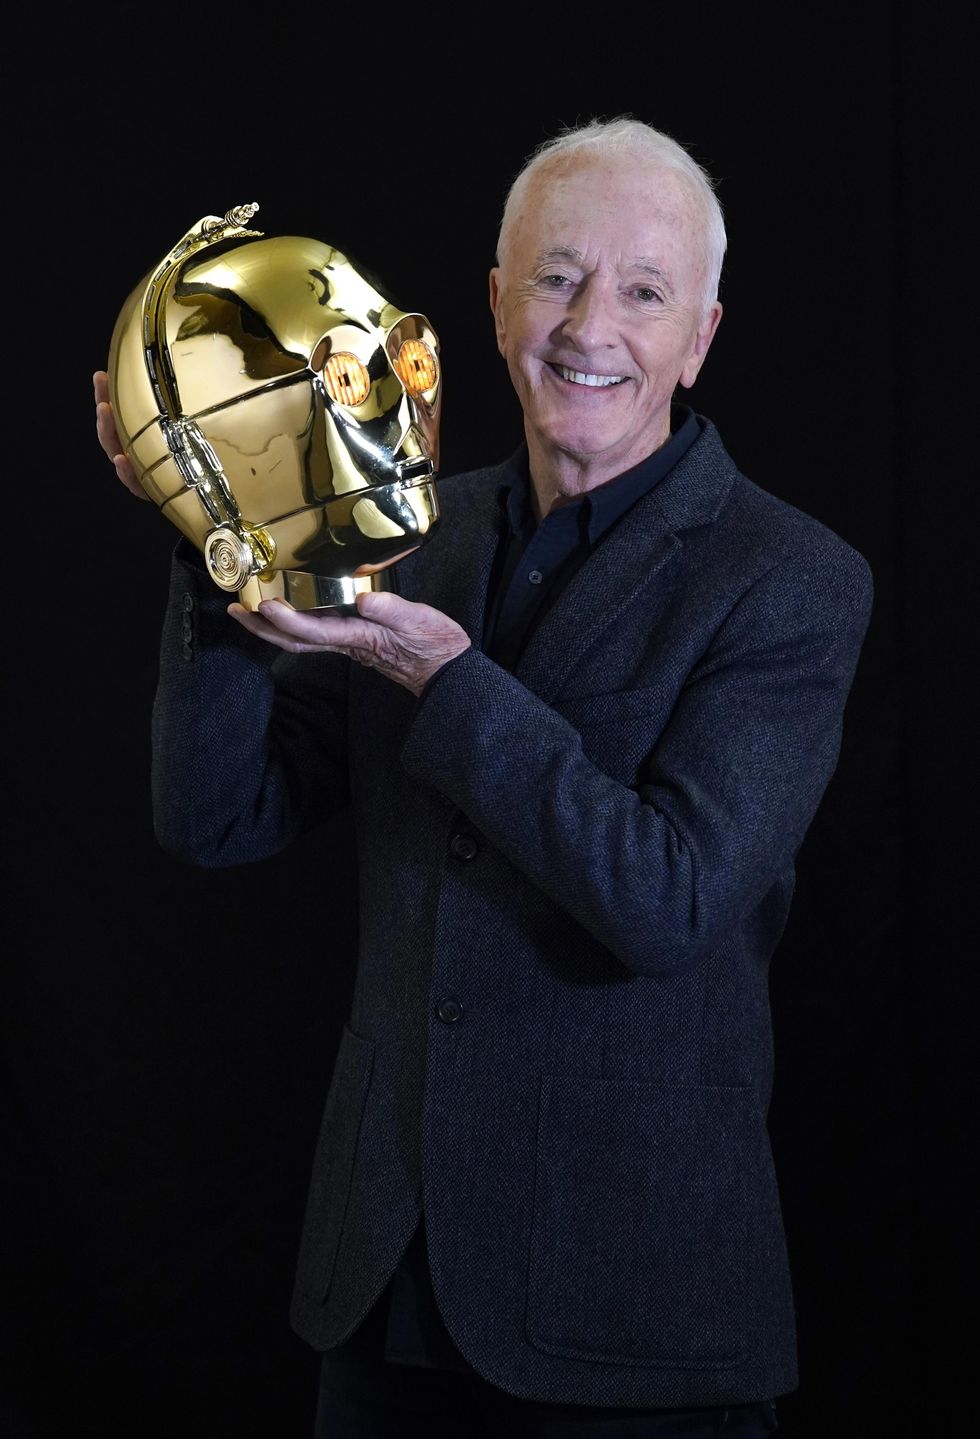 C-3PO head worn by Anthony Daniels in first Star Wars film to sell for up to £1m